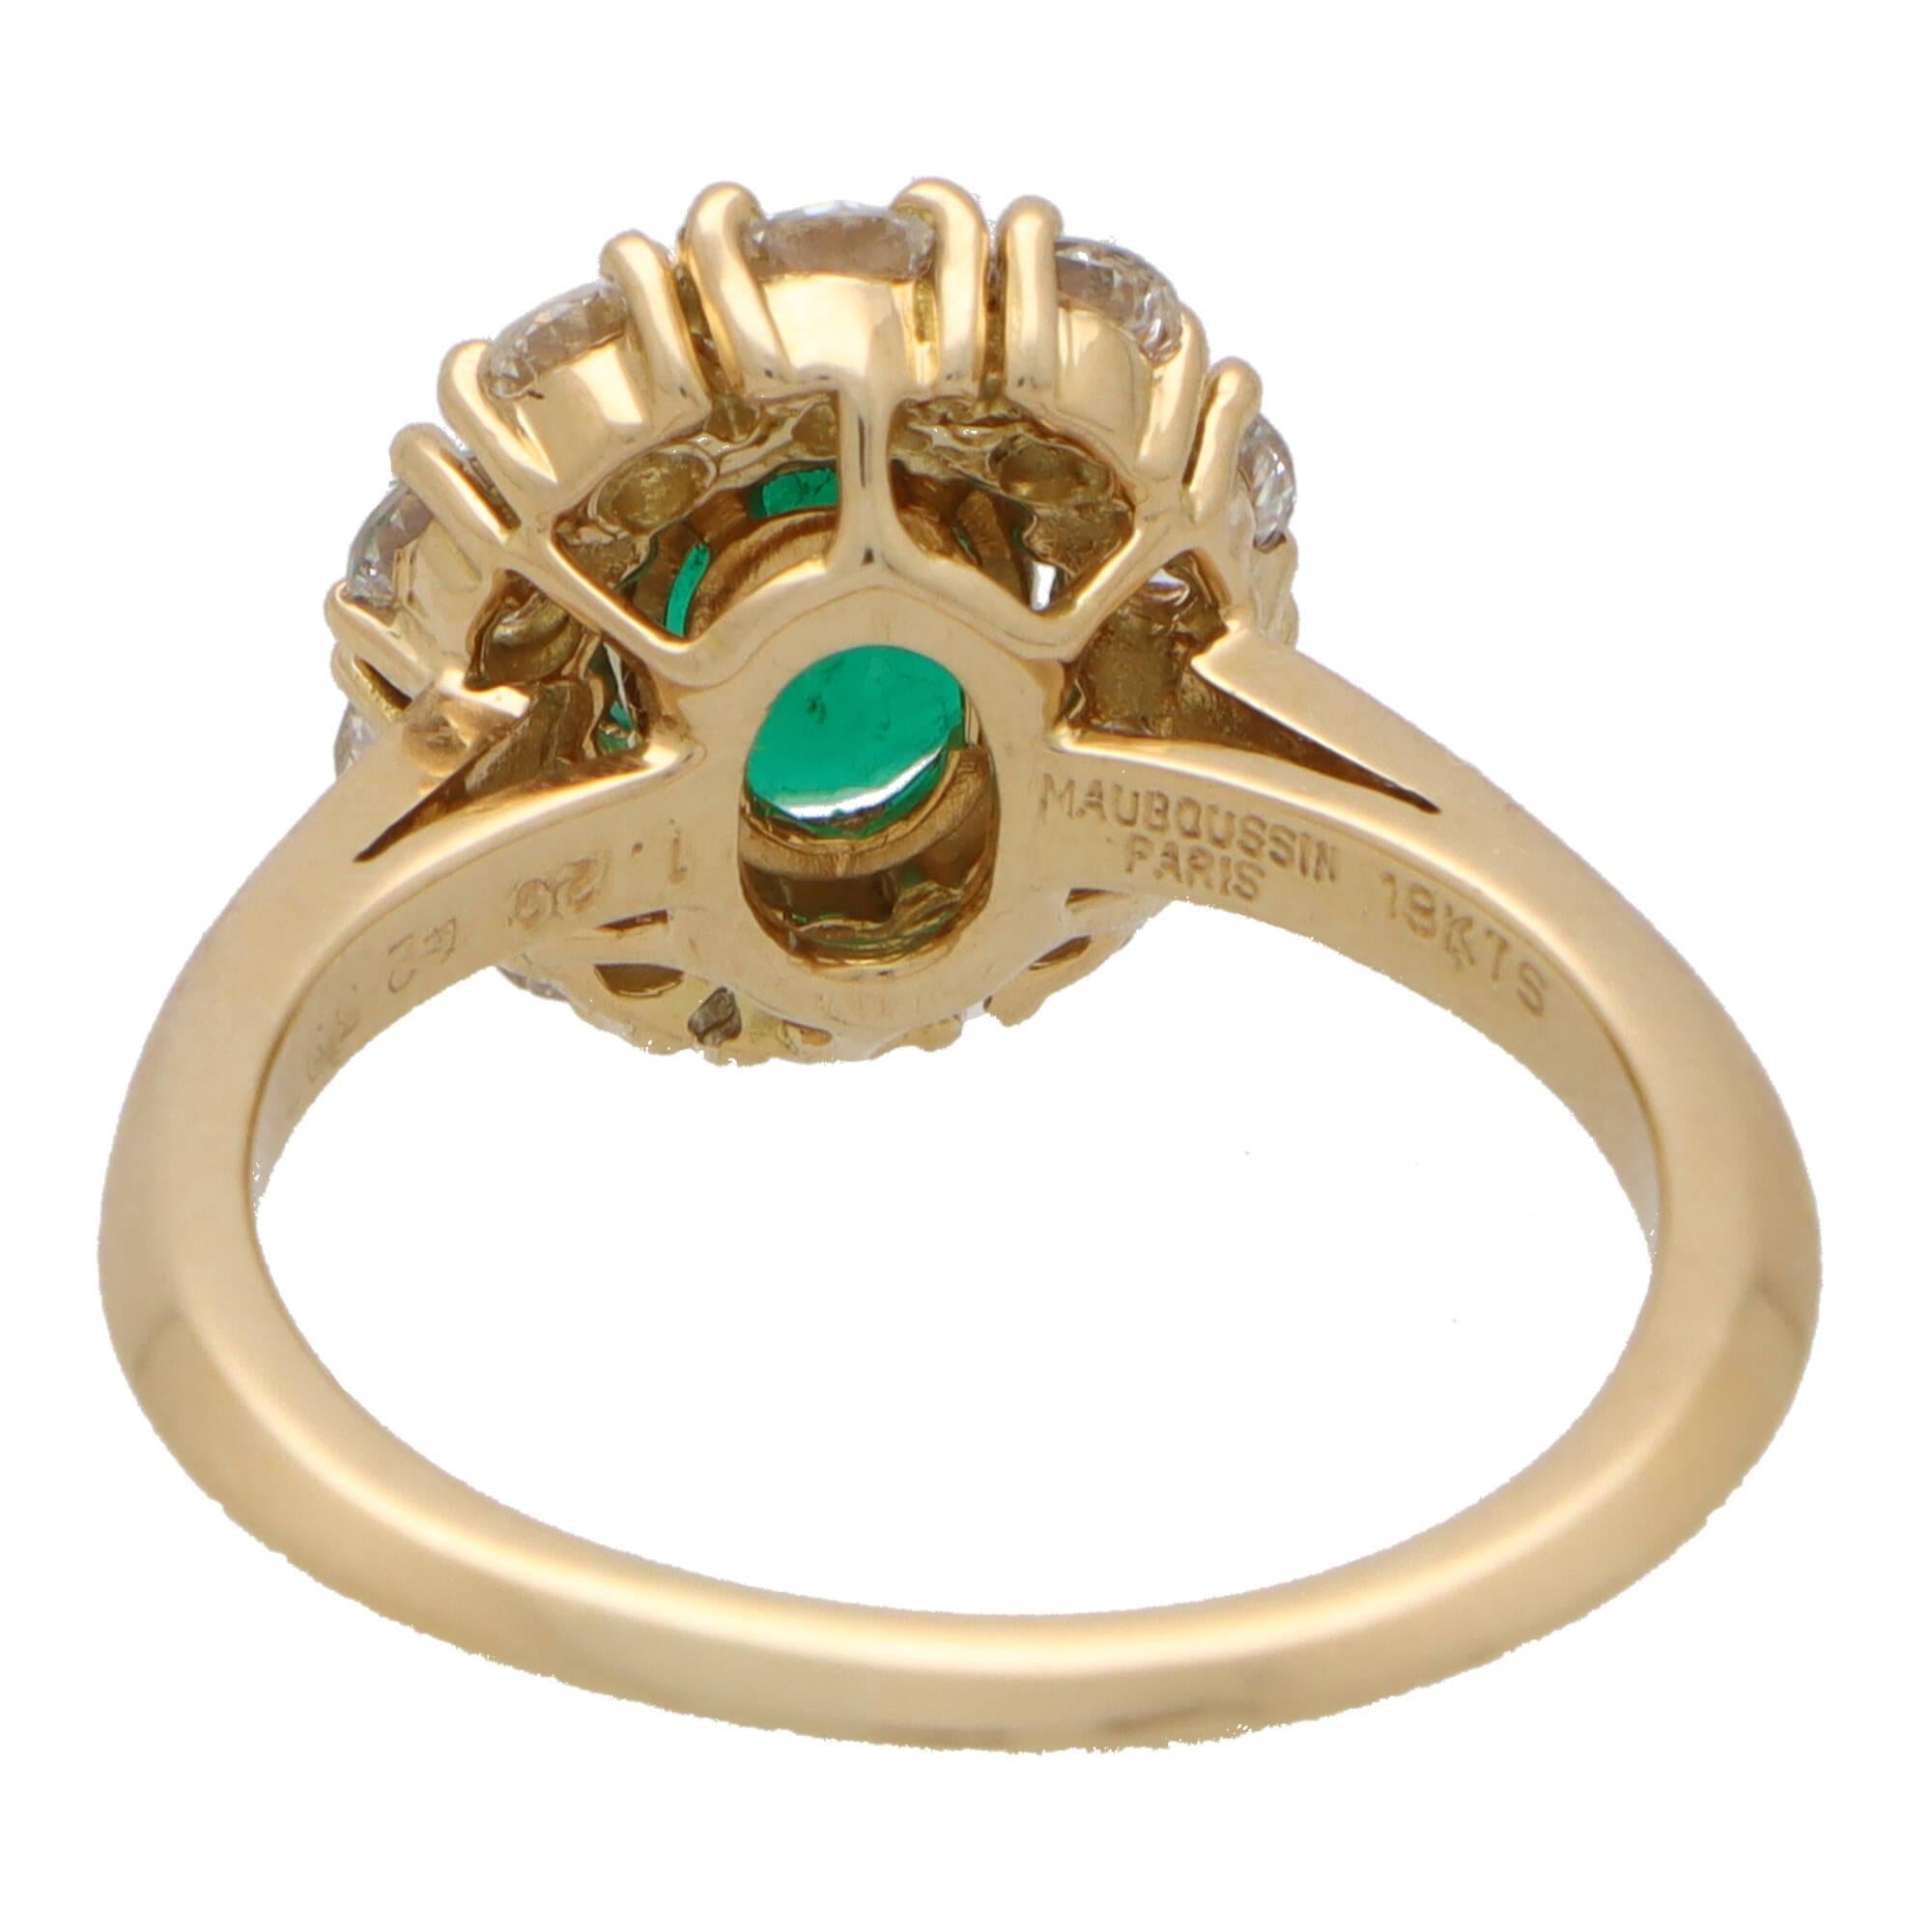 Women's or Men's Vintage Mauboussin Emerald and Diamond Cluster Ring Set in 18k Yellow Gold